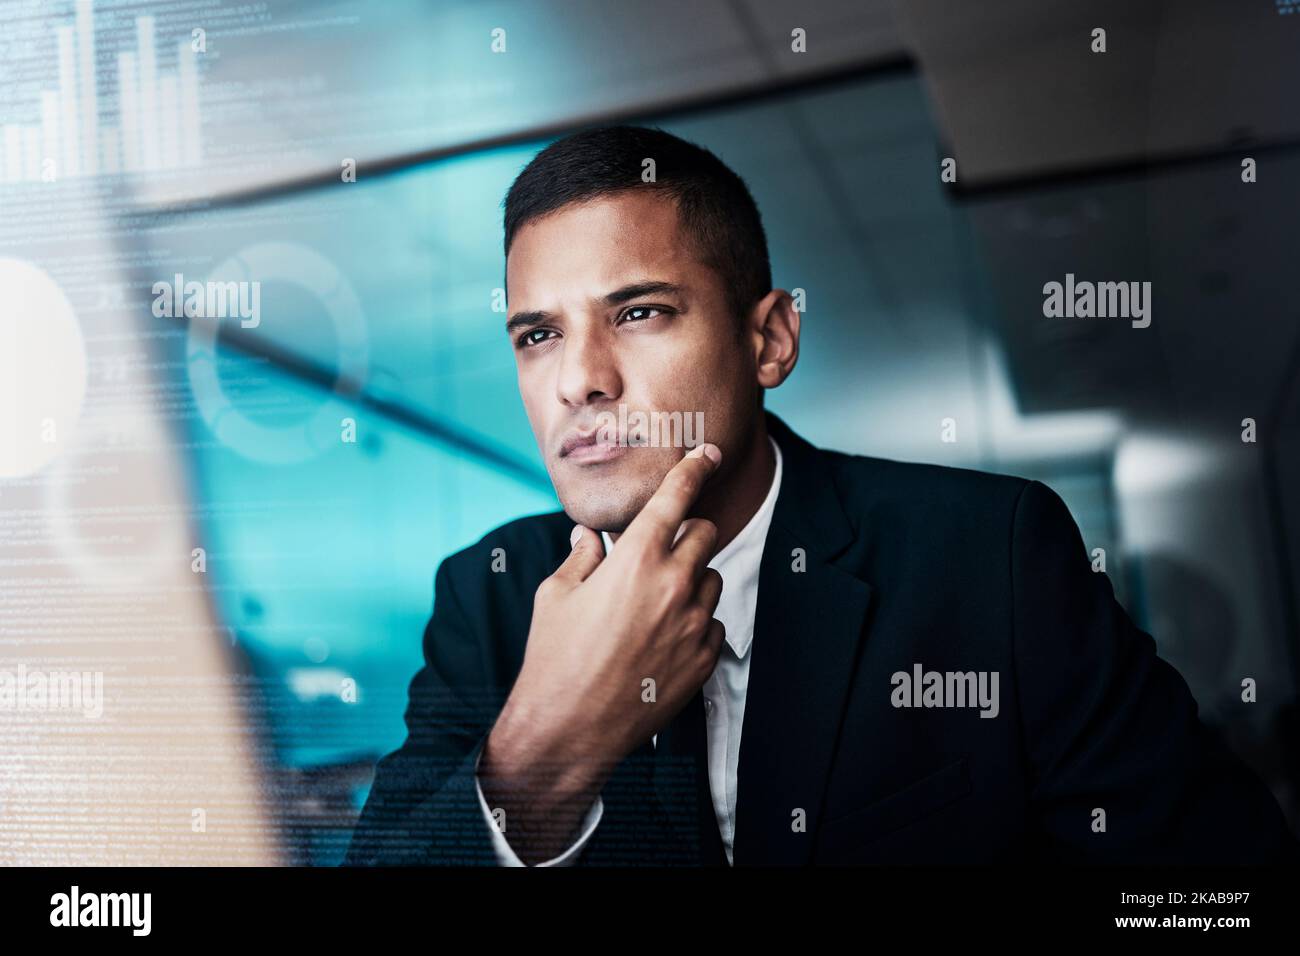 Cyber security man, digital transformation or computer coding for thinking web design engineer working on seo software or database. Infographic Stock Photo